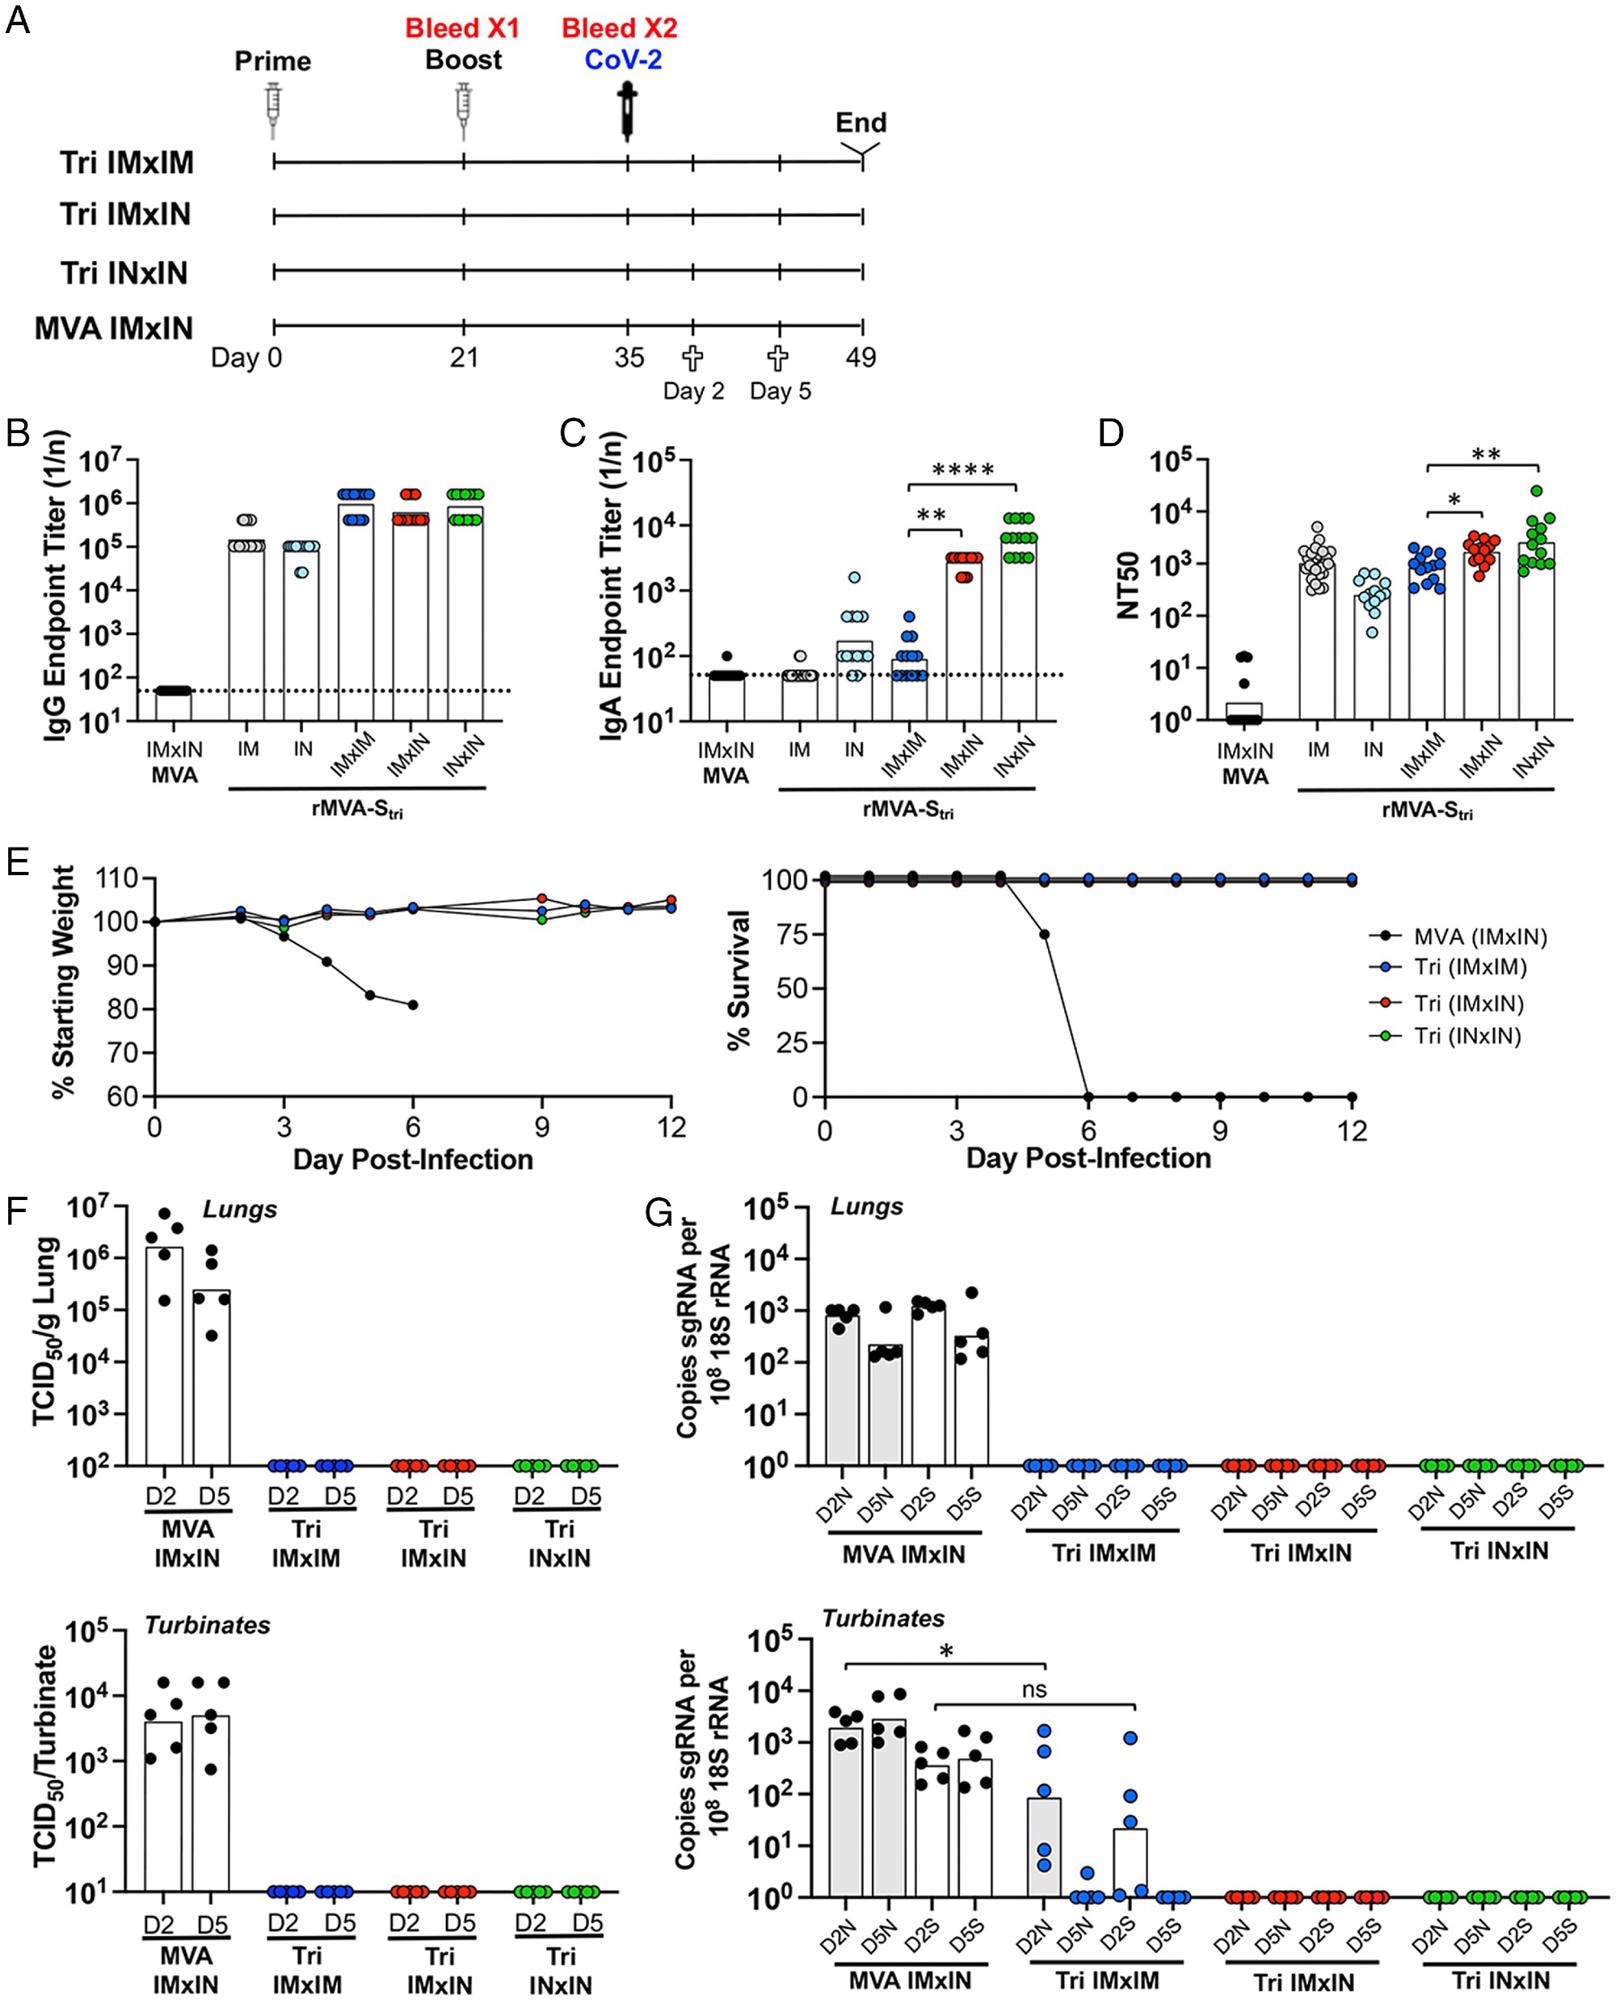 Comparison of immune responses and protection following IN and IM vaccinations. (A) K18-hACE2 mice were primed and boosted with rMVA-Stri by IN or IM route to form three groups of 13 mice: IMxIM, IMxIN, and INxIN. In addition, a control group received MVA IM followed by MVA IN. Mice from each group were bled at 3 wk after the prime and 2 wk after the boost. At the latter time, mice were challenged by IN inoculation of 105 TCID50 of SARS-CoV-2. On days 2 and 5 after challenge, five mice from each group were killed and three remained to follow weight and morbidity. (B and C) Serum IgG and IgA endpoint ELISA titers are shown for individual mice and the geometric mean. The dashed line represents the limit of detection. (D) Individual and geometric mean pseudovirus neutralizing titers are shown. (E) Three mice of each group were monitored for weight loss and survival. (F) At days 2 and 5 after challenge with SARS-CoV-2, homogenates were prepared from the lungs and nasal turbinates of five mice from each group and the TCID50 of SARS-CoV-2 determined. (G) RNA was extracted from the homogenates and copies of sgN (shaded) and sgS (unshaded) RNA were determined by ddPCR and normalized to 18S rRNA in the same sample. Significance: *P = 0.04, **P < 007, ****P < 0.0001; ns, not significant.